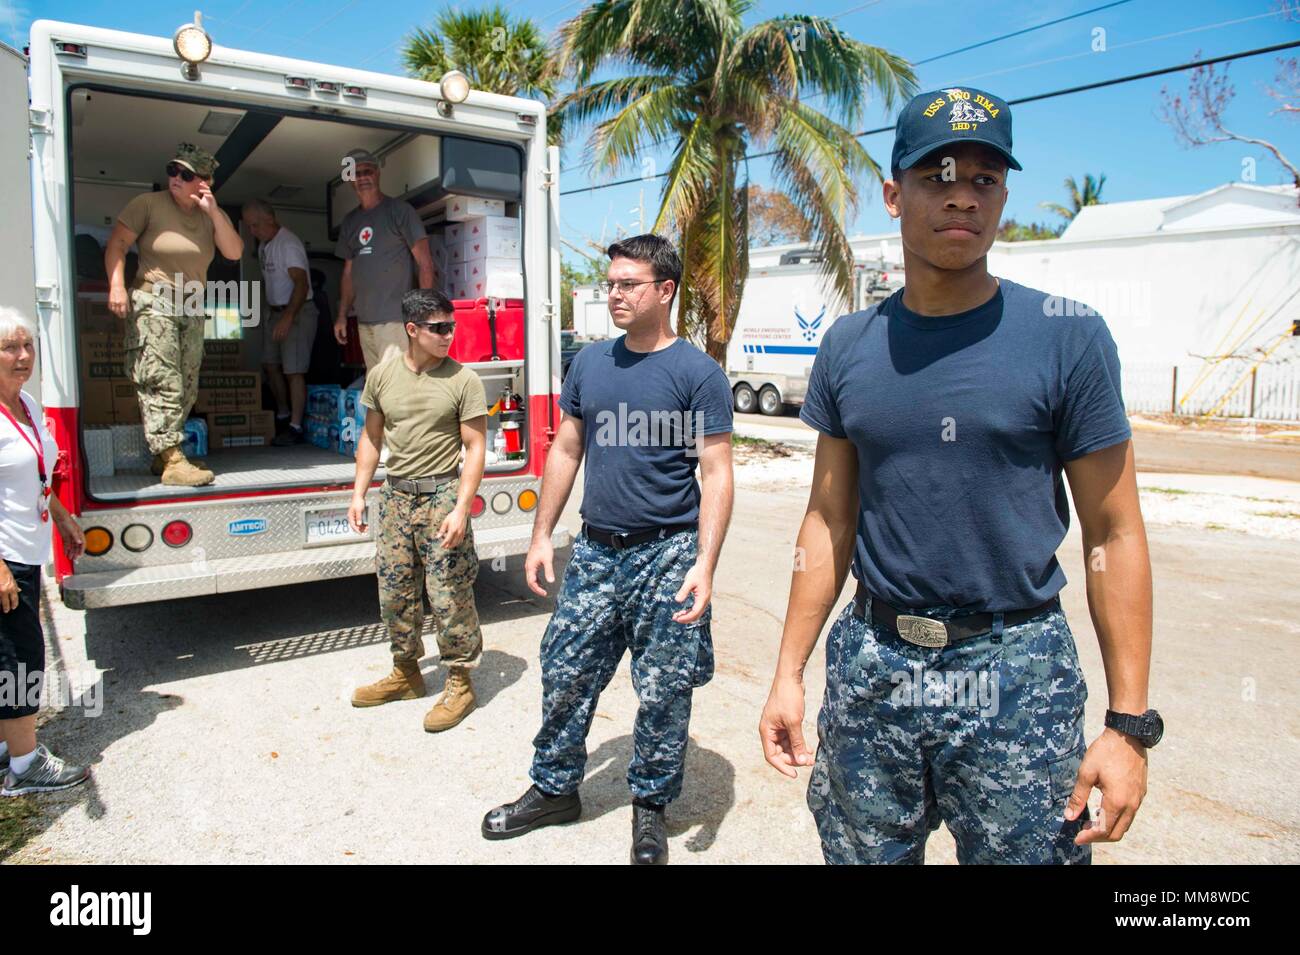 170915-N-YL073-0260 KEY WEST, Fla. (Sept. 15, 2017) Sailors assigned to USS New York (LPD 21), USS Iwo Jima (LHD 7), and Assault Craft Unit (ACU) 2, and Army National Guard Soldiers, prepare to give food and water to American Red Cross volunteers during humanitarian relief efforts following Hurricane Irma's landfall in Key West, Florida. The Department of Defense is supporting Federal Emergency Management Agency, the lead federal agency, in helping those affixed by Hurricane Irma to minimize suffering and as one component of the overall whole-of-government response efforts. (U.S. Navy photo by Stock Photo